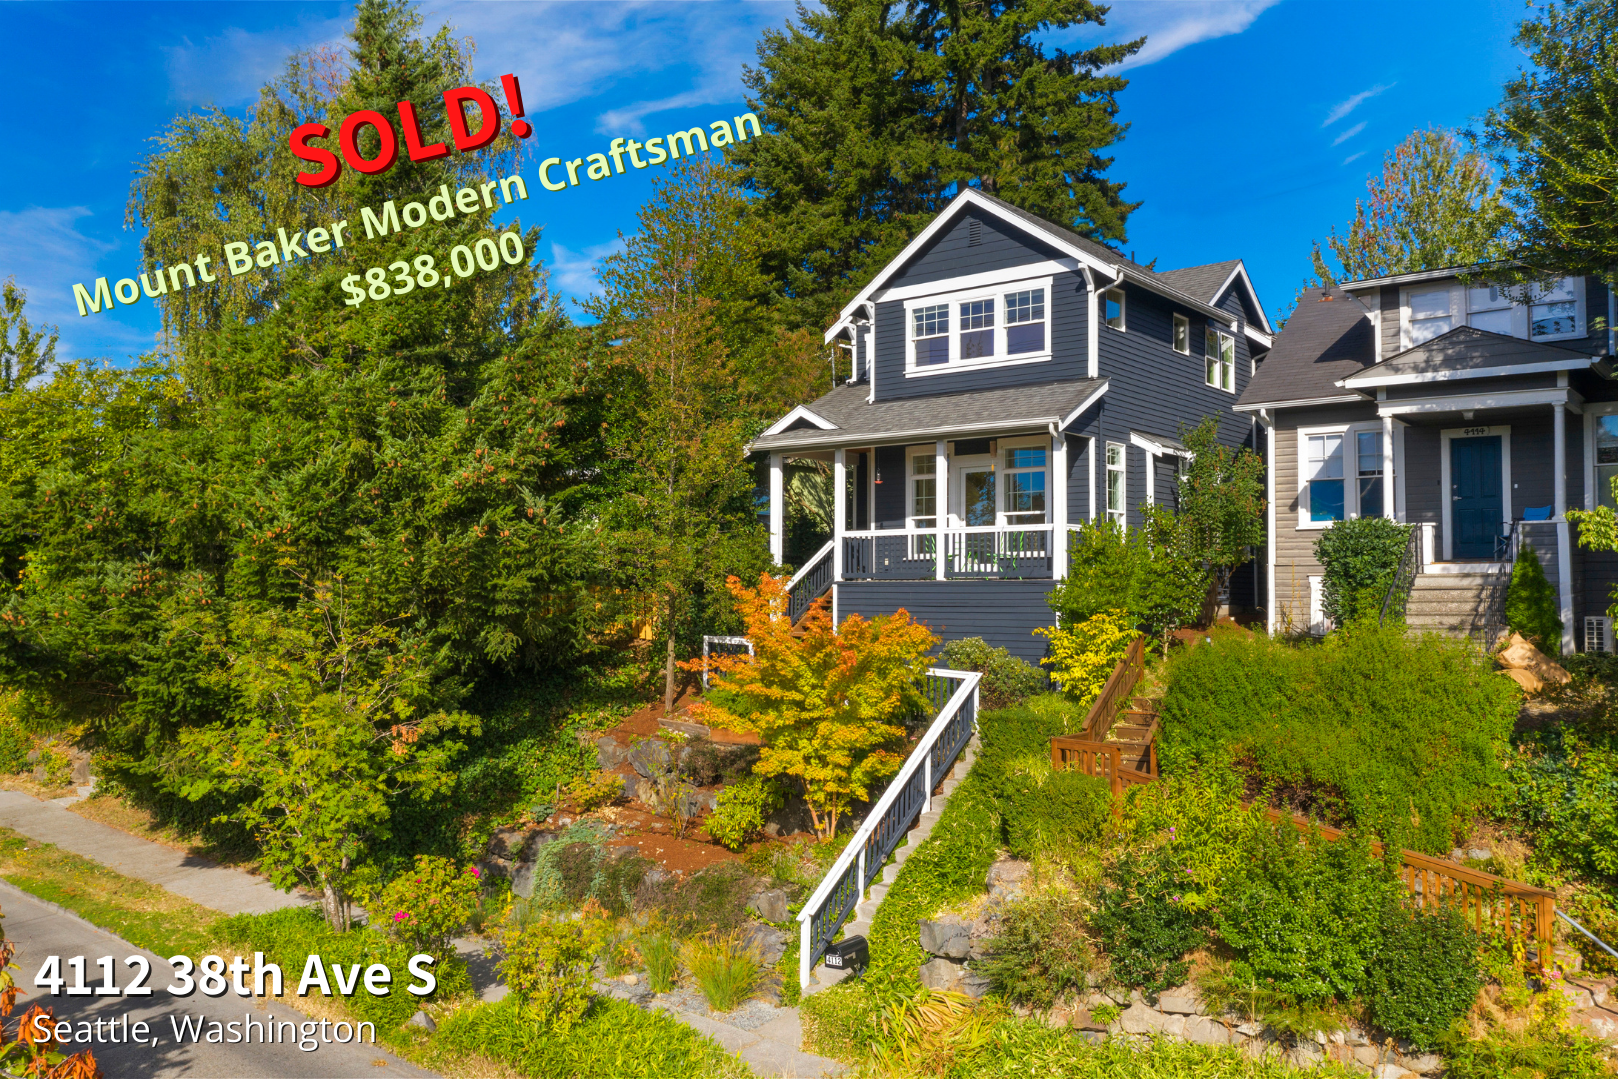 4112 38th Ave S - SOLD!